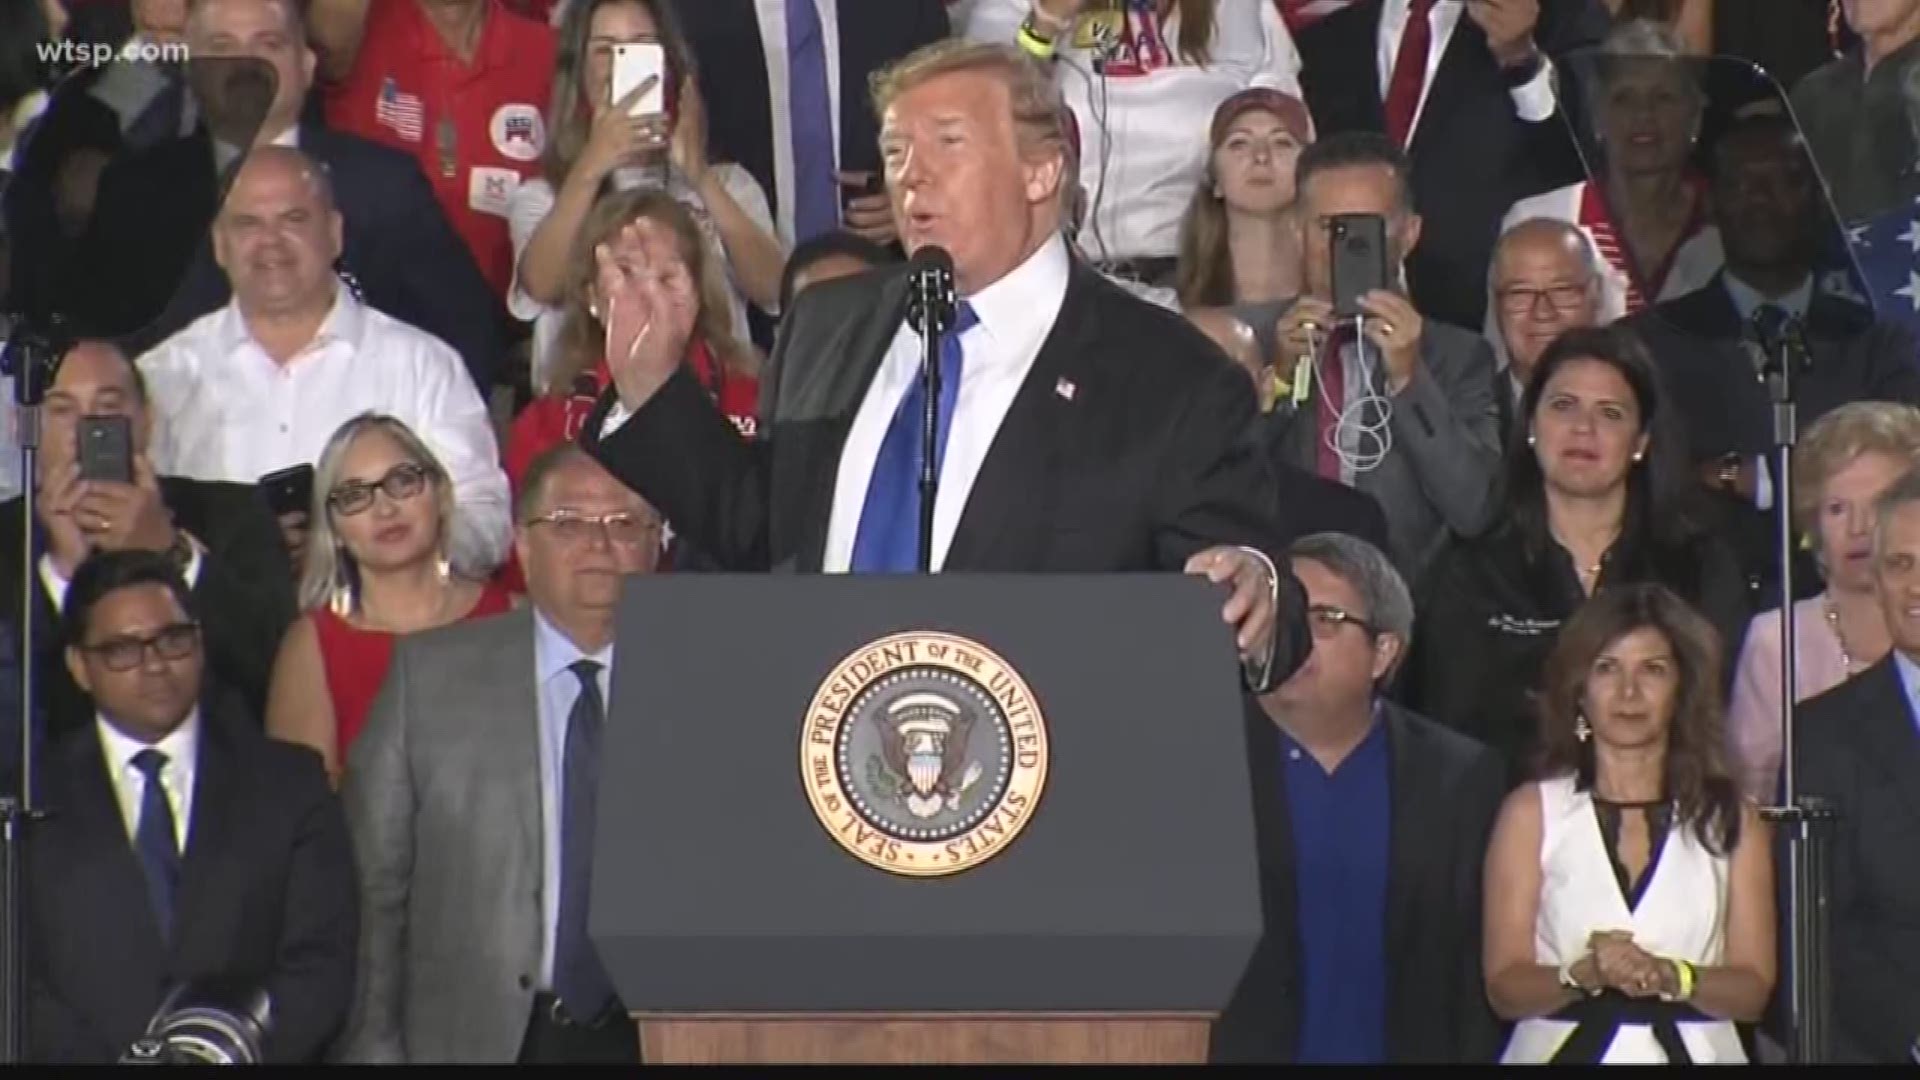 President Trump addressed the political and humanitarian crisis in Venezuela during a visit to Florida.